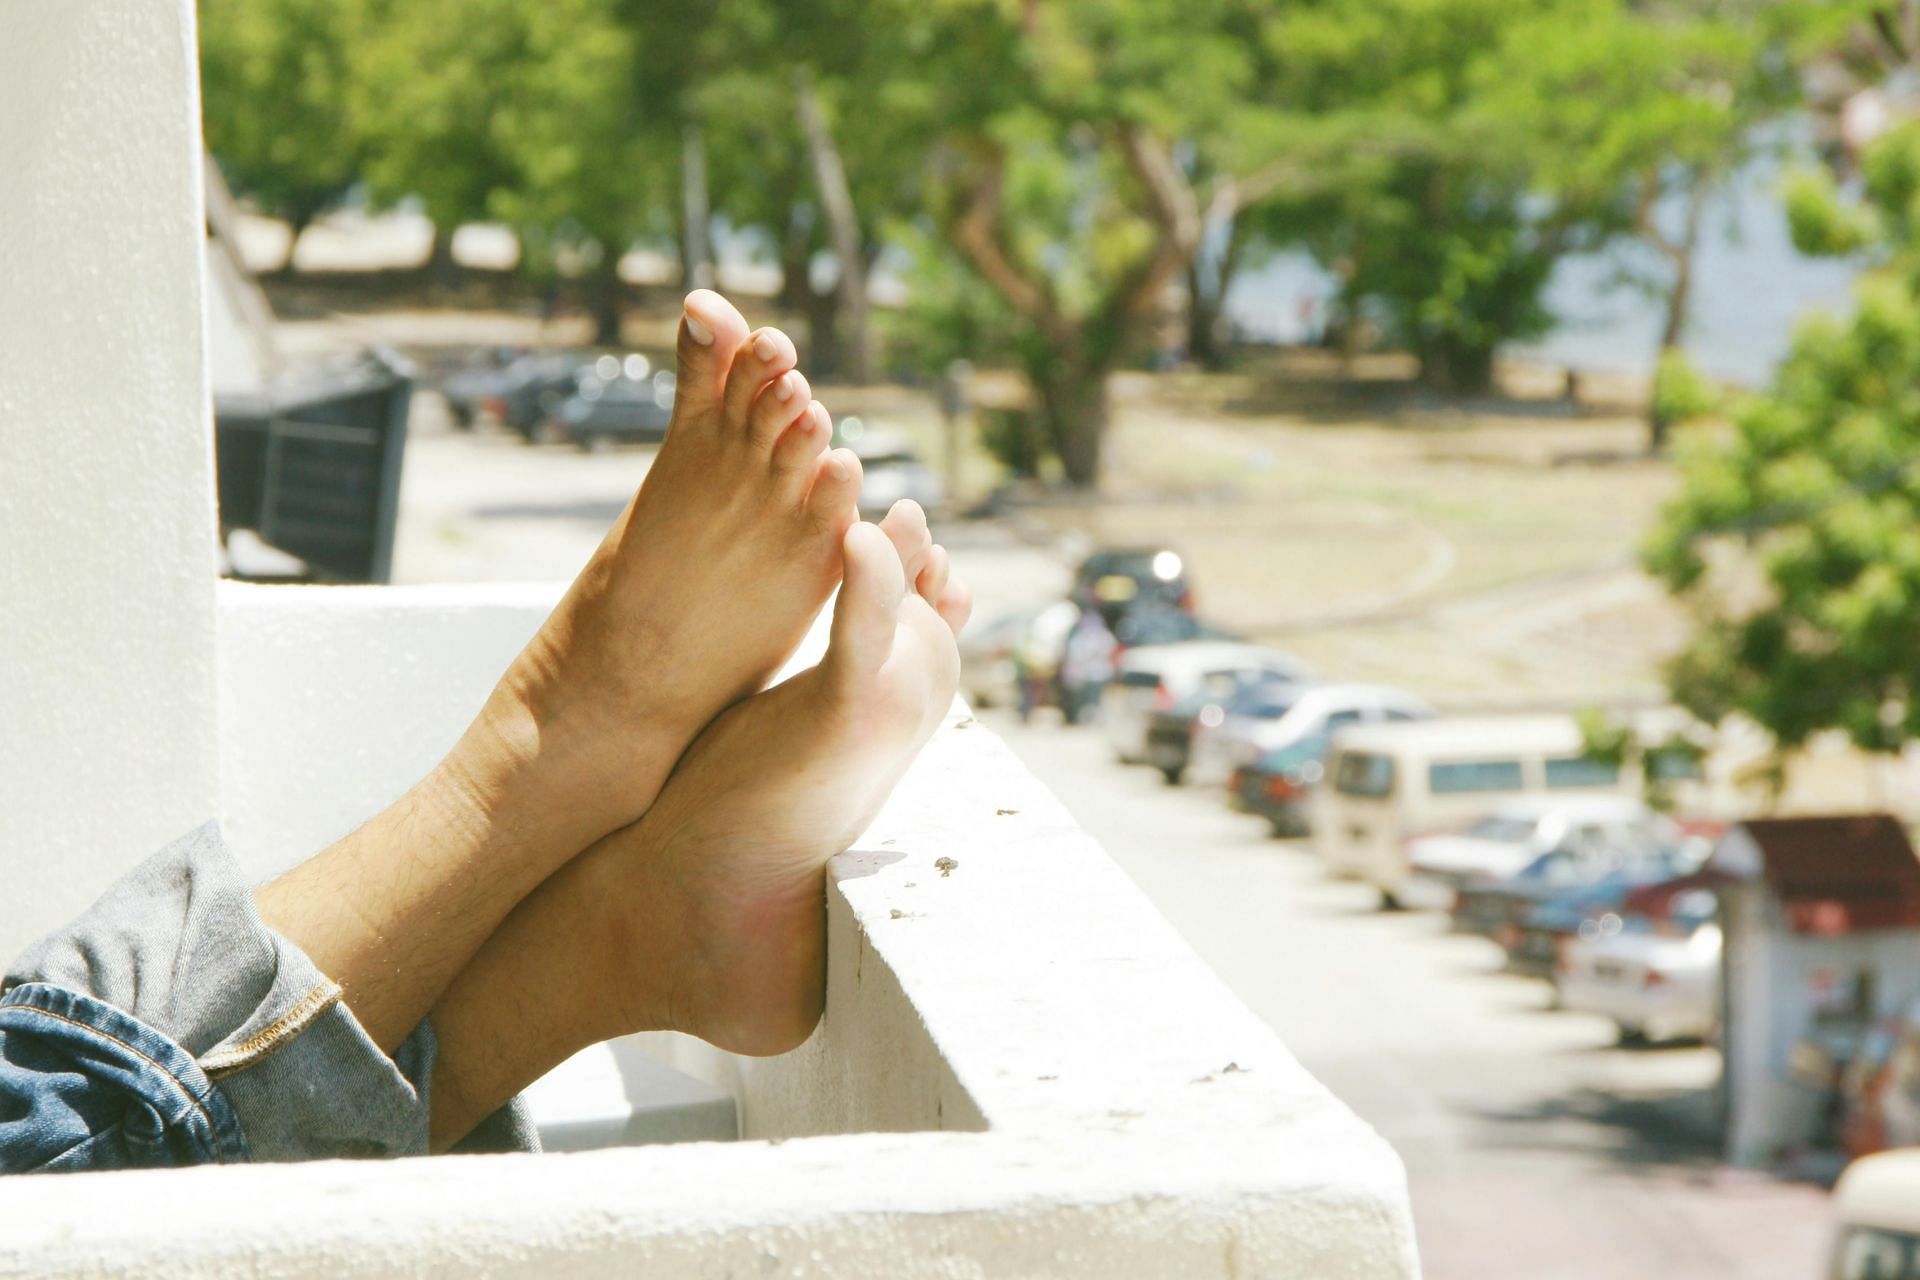 causes of swollen feet and ankles (image sourced via Pexels / Photo by khairul)